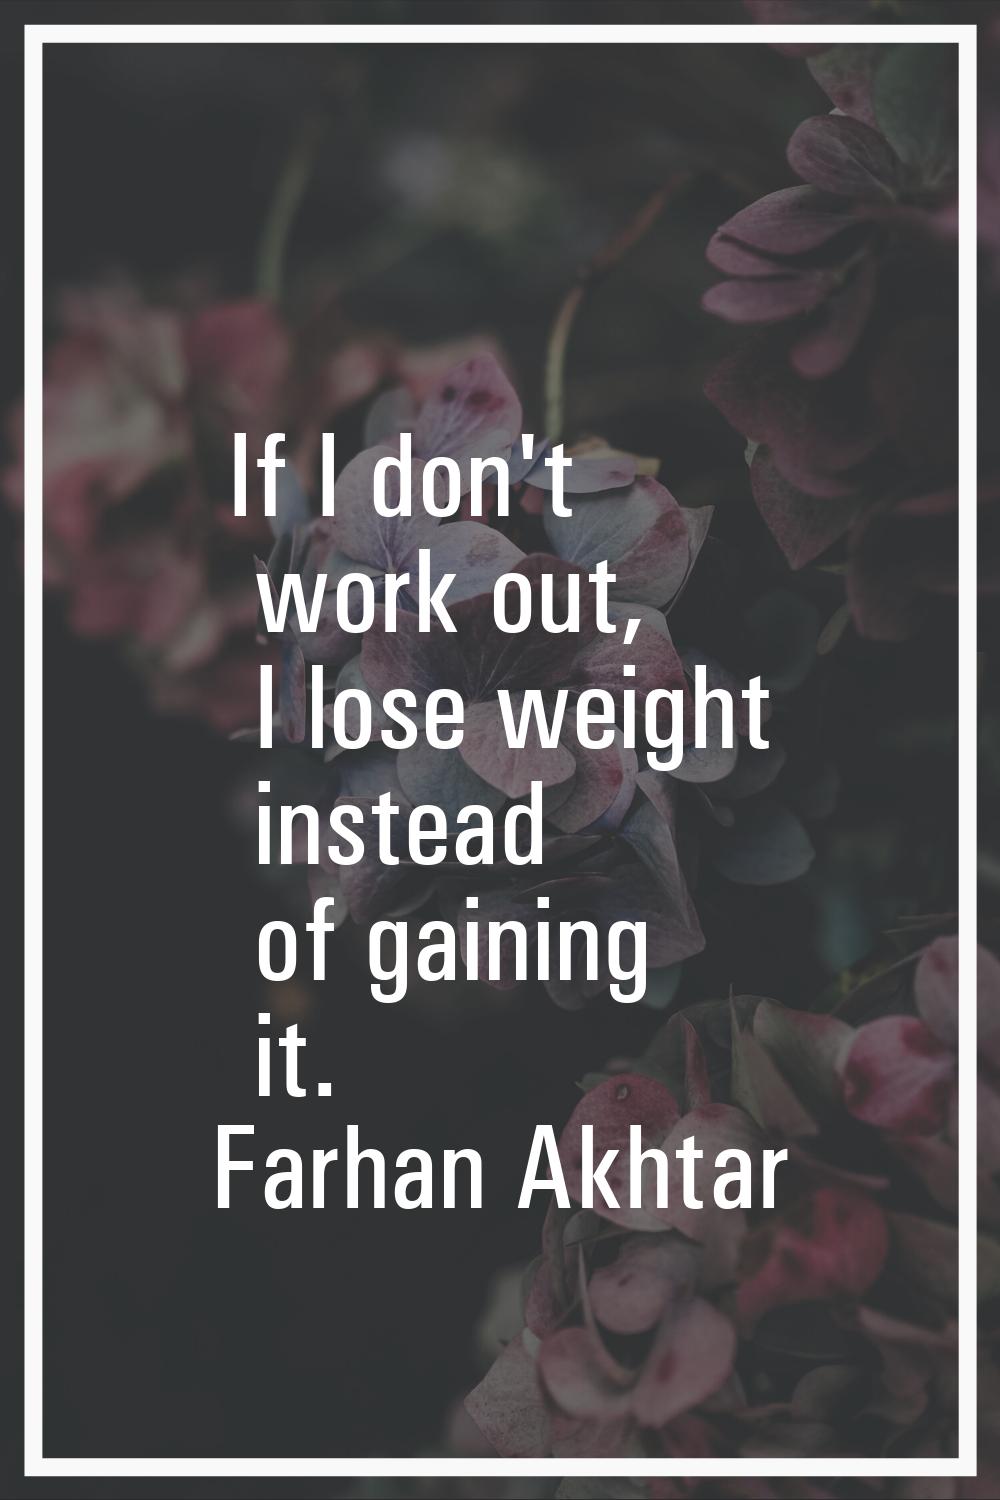 If I don't work out, I lose weight instead of gaining it.